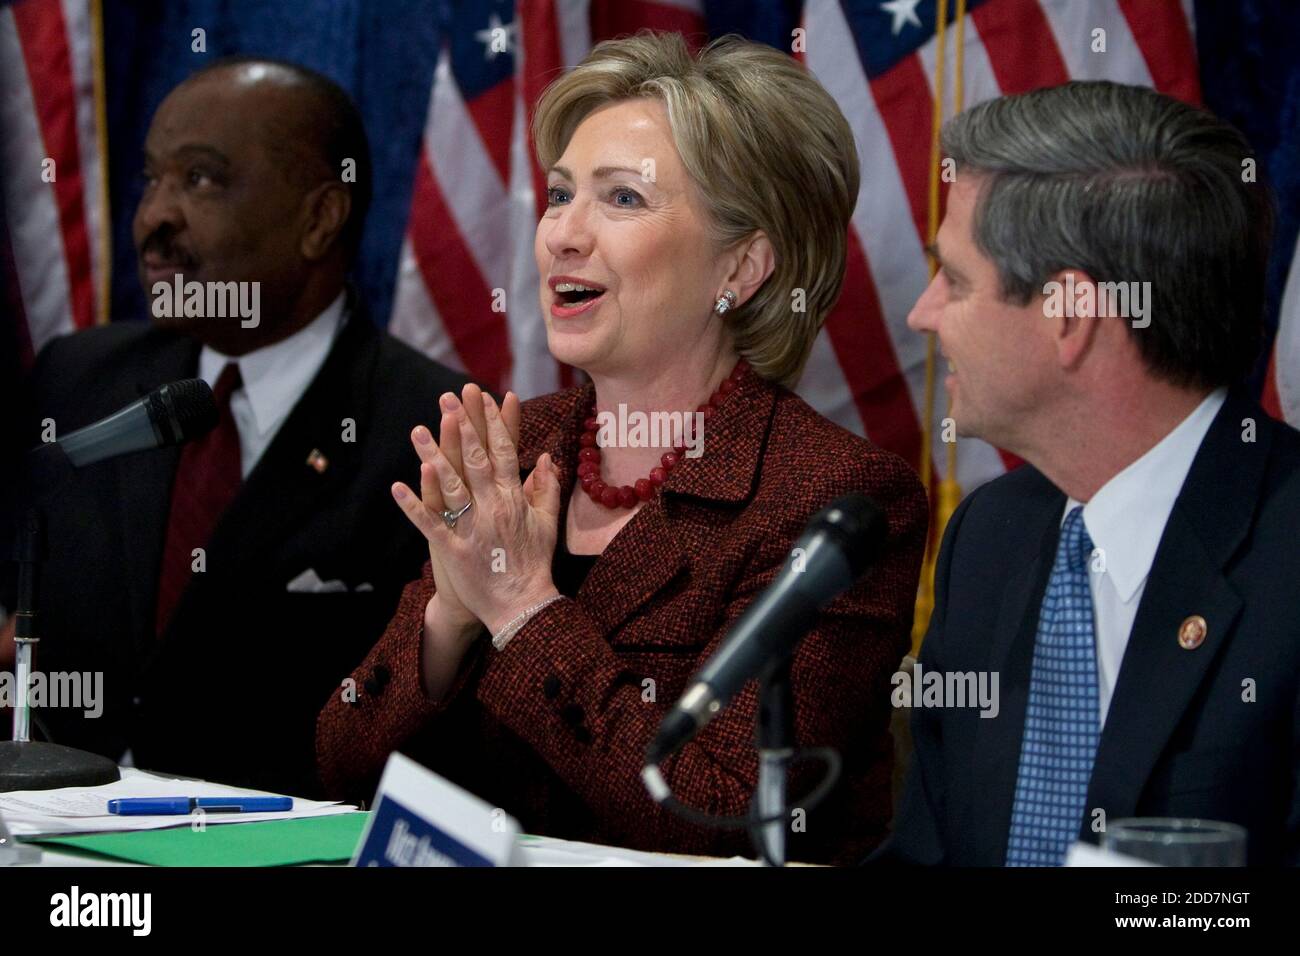 Democratic Presidential candidate Hillary Clinton takes part in a news conference with military officers in Washington DC, USA on March 6, 2008. Photo by Chuck Kennedy/MCT/ABACAPRESS.COM Stock Photo